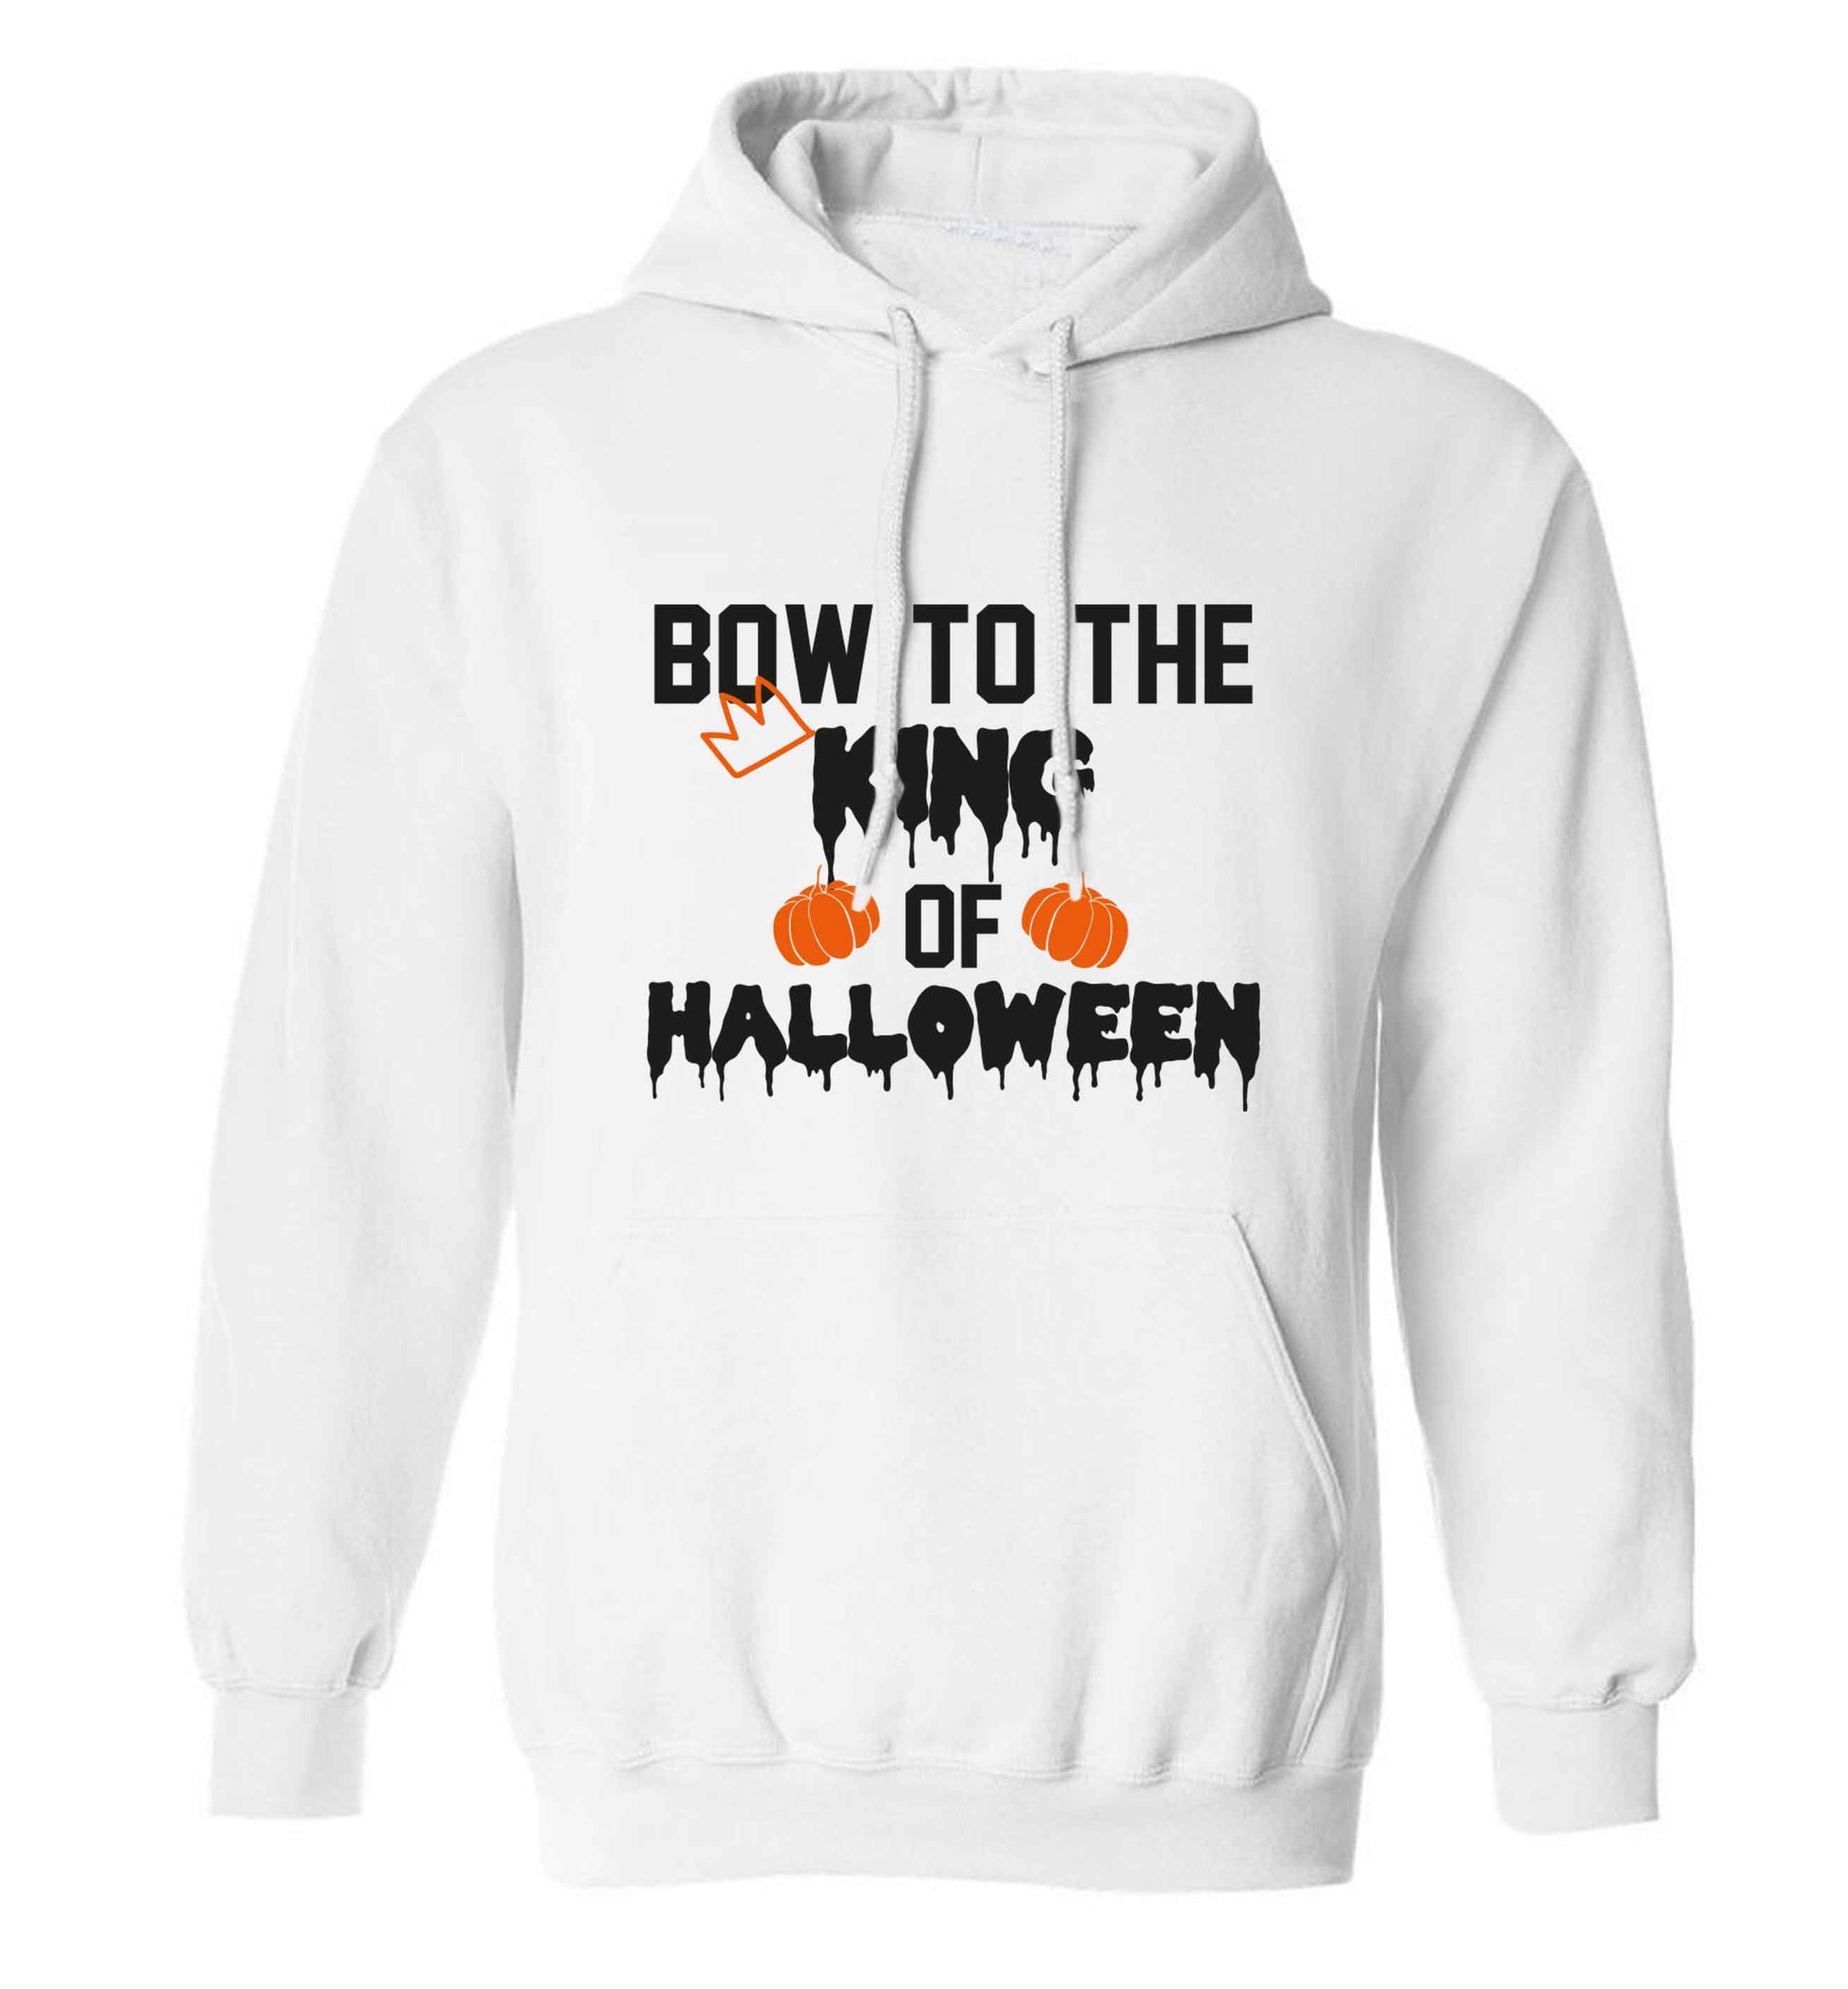 Bow to the King of halloween adults unisex white hoodie 2XL